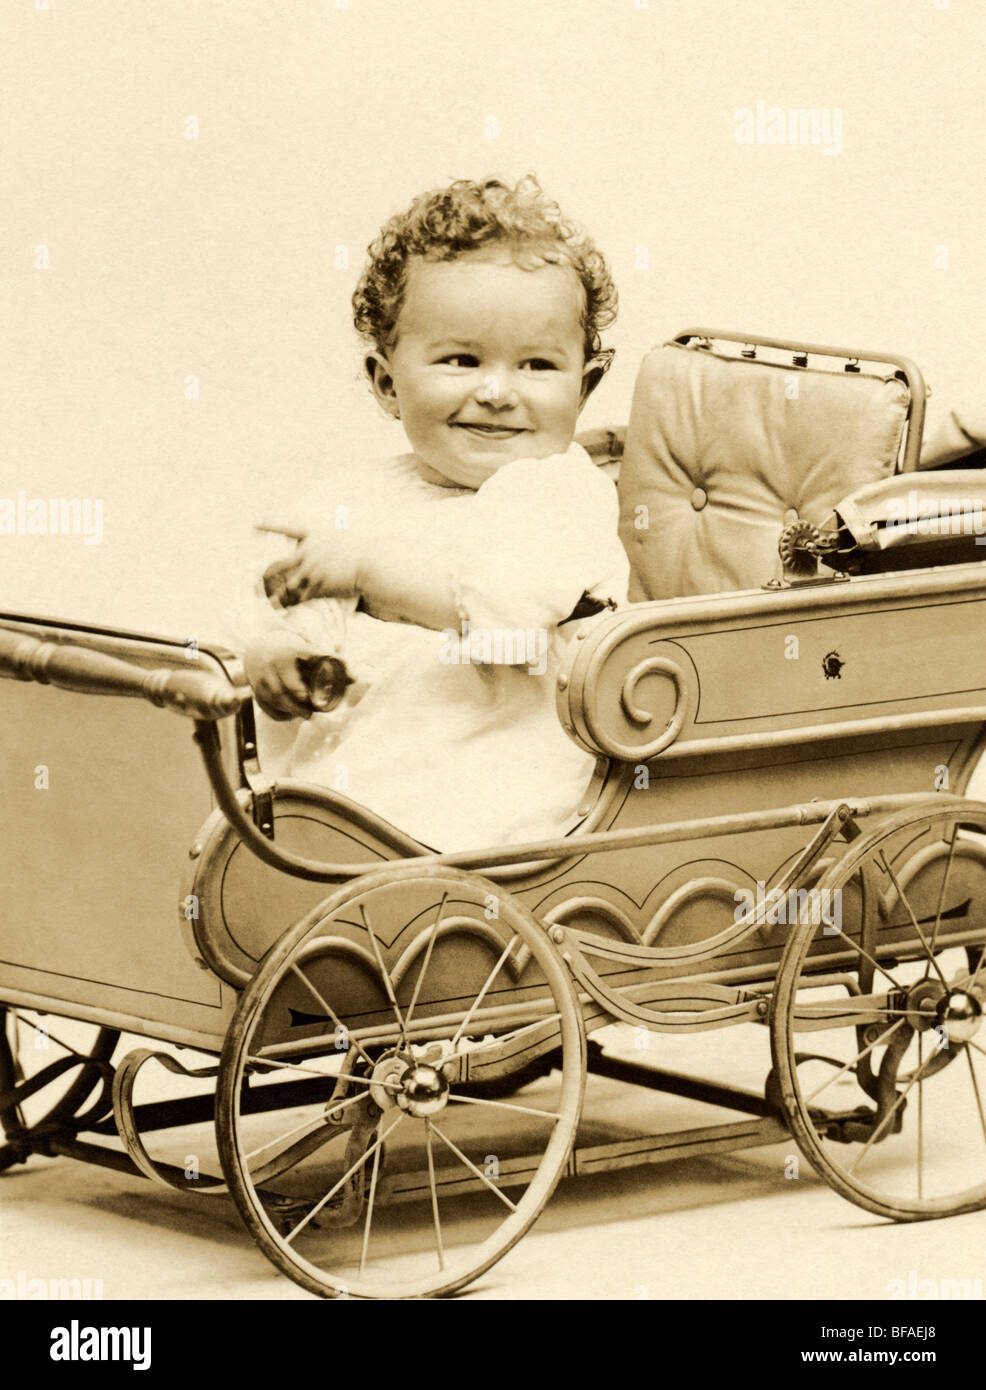 Cute Baby in Decorative Pedal Car Stock Photo